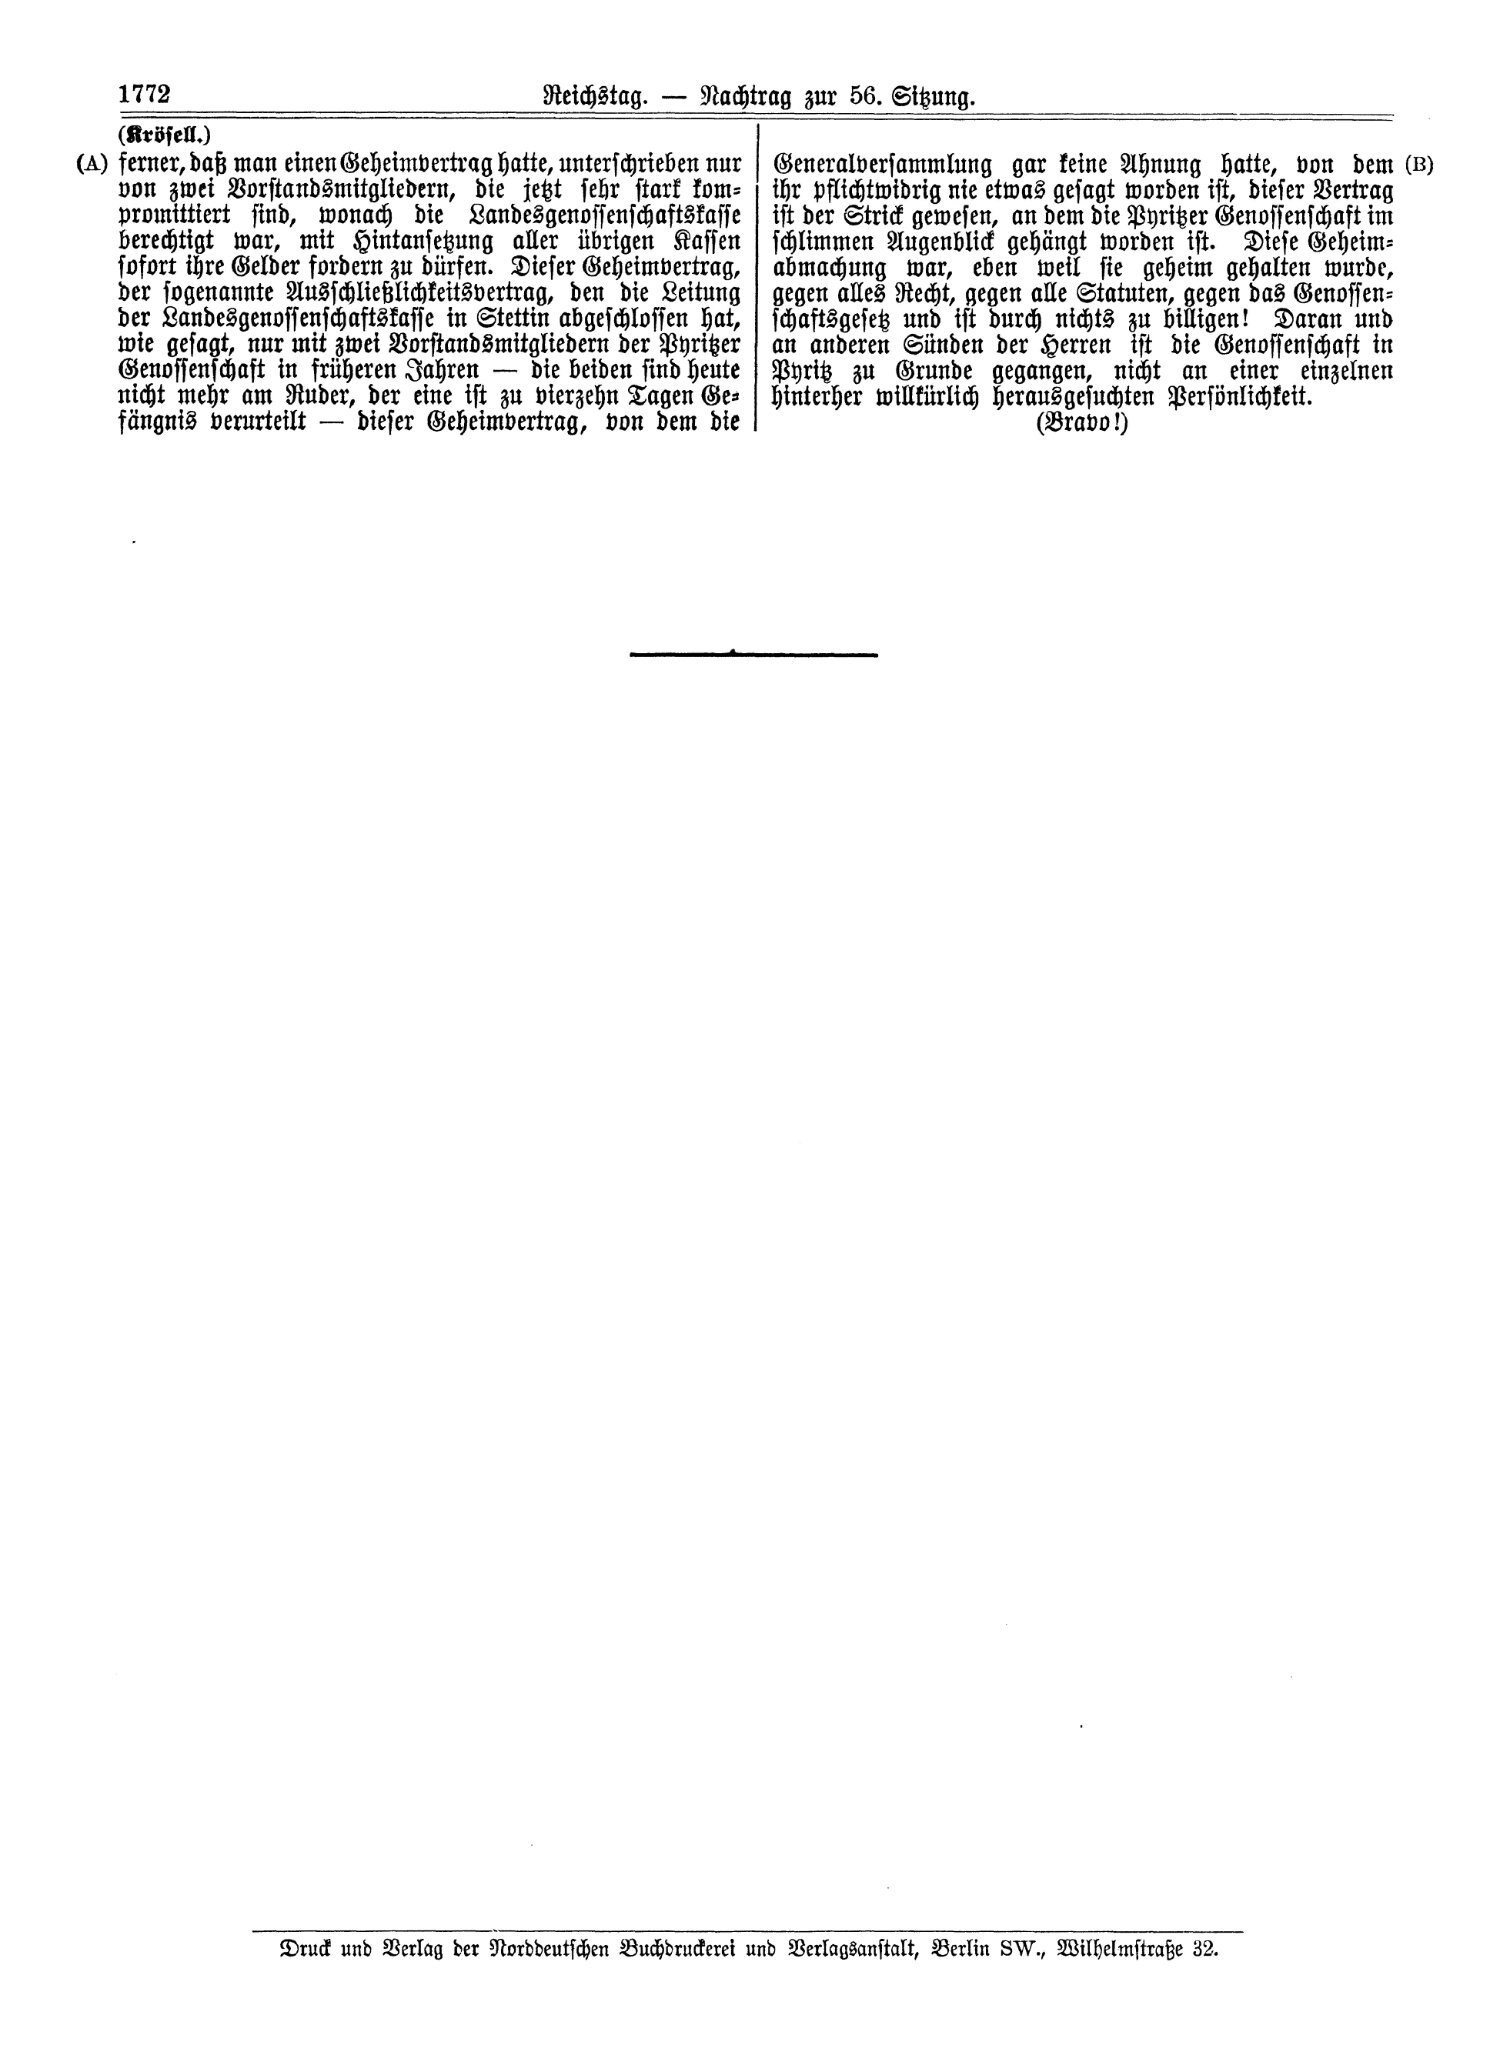 Scan of page 1772